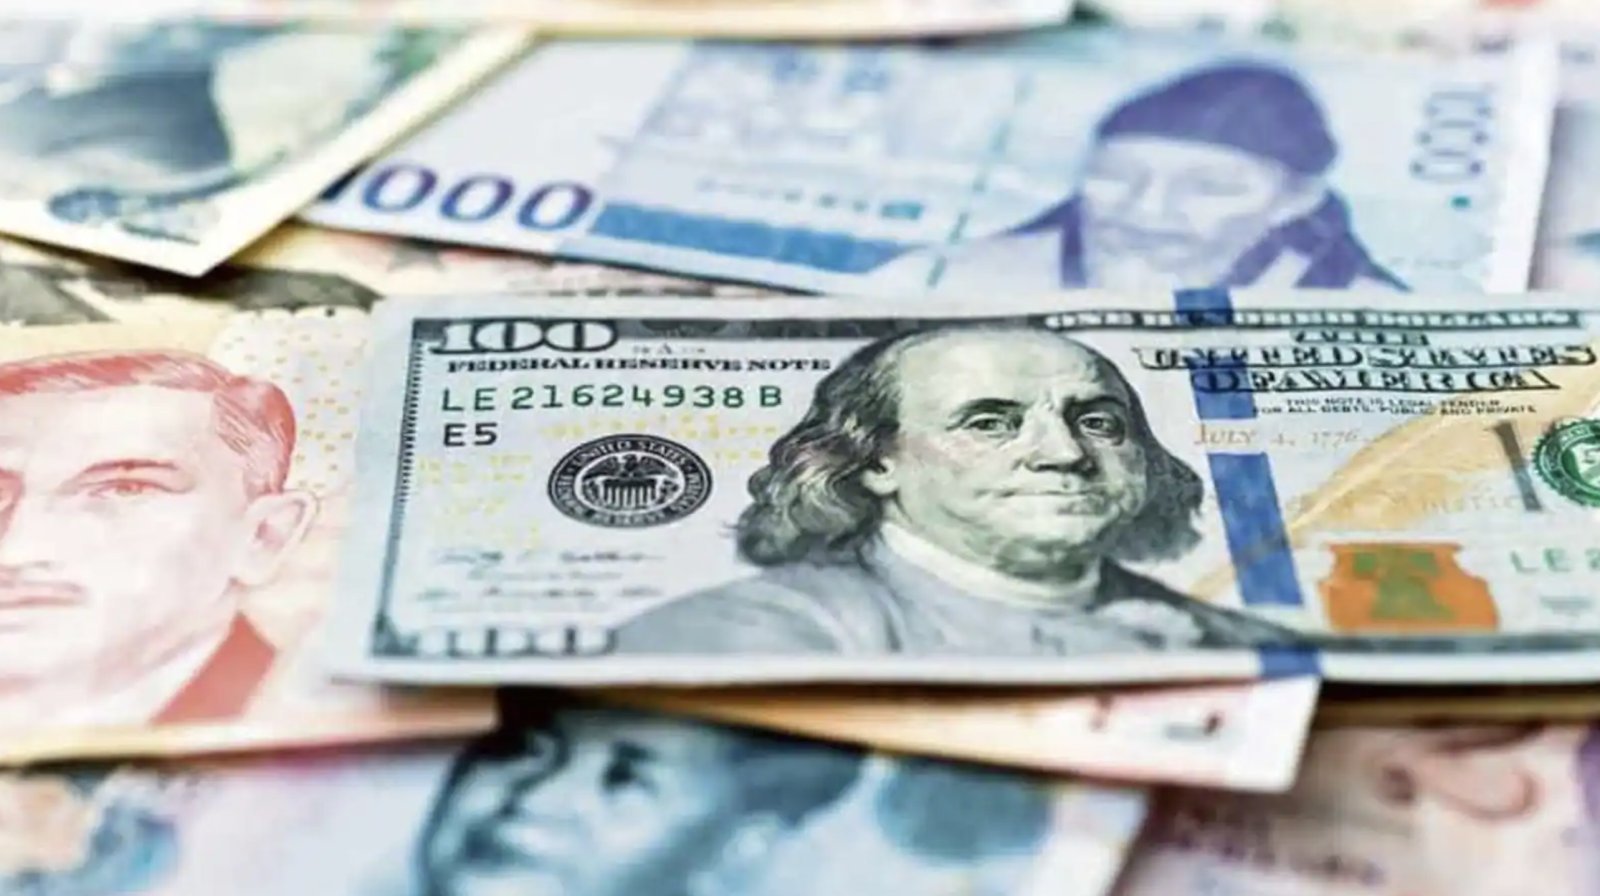 India's foreign exchange reserves are continuously increasing, crossed the 600 billion dollar mark again in four months